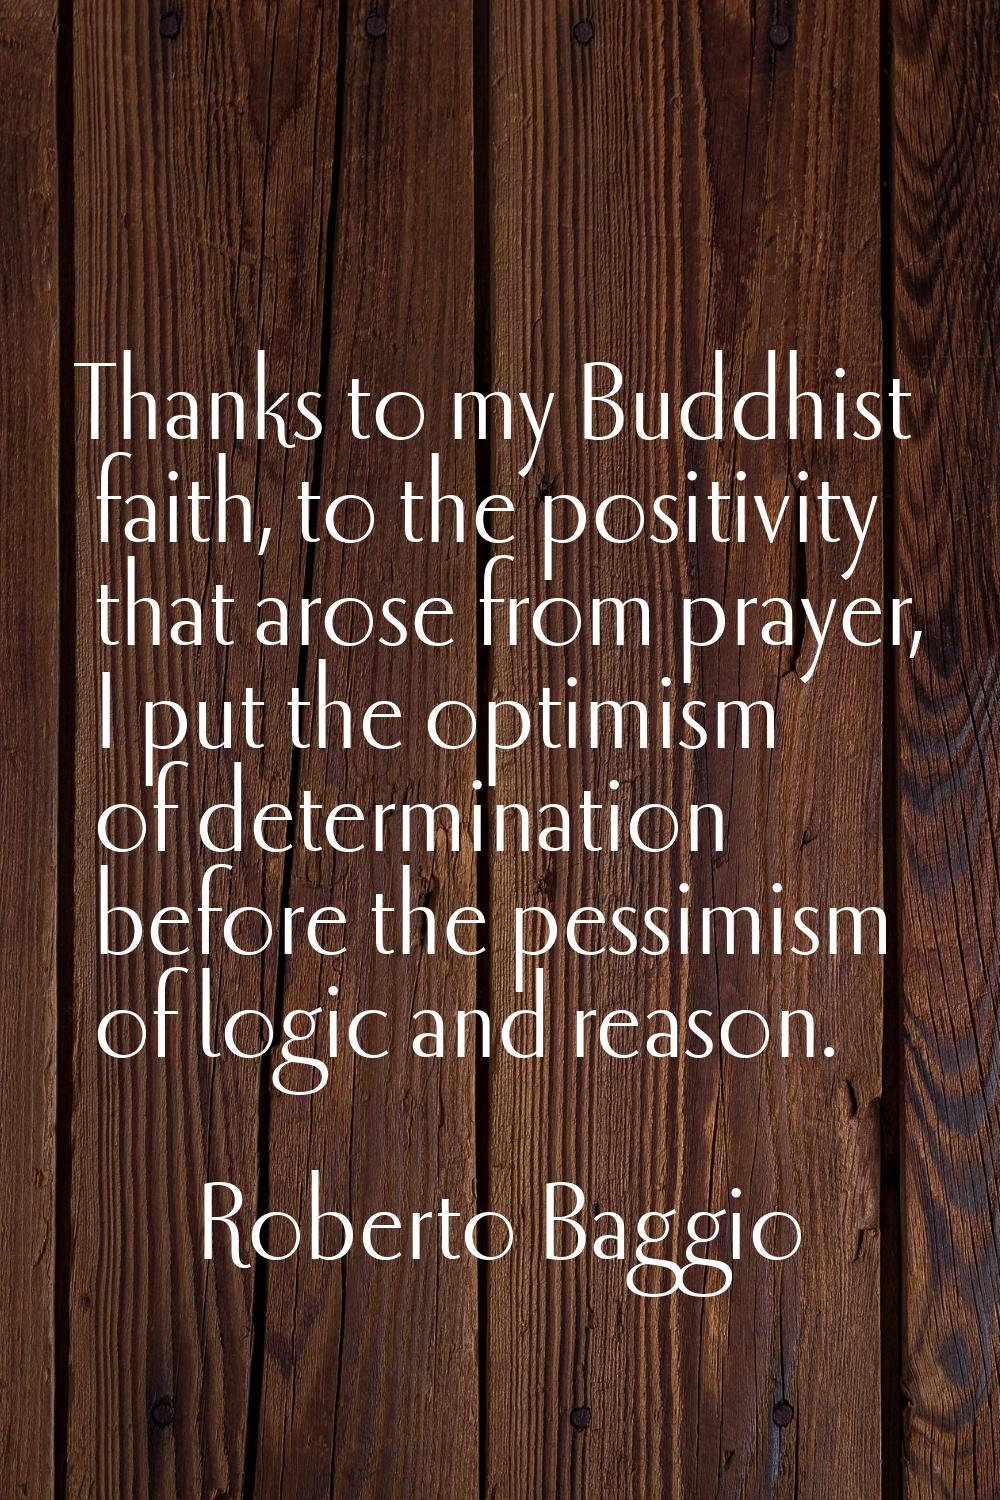 Thanks to my Buddhist faith, to the positivity that arose from prayer, I put the optimism of determ